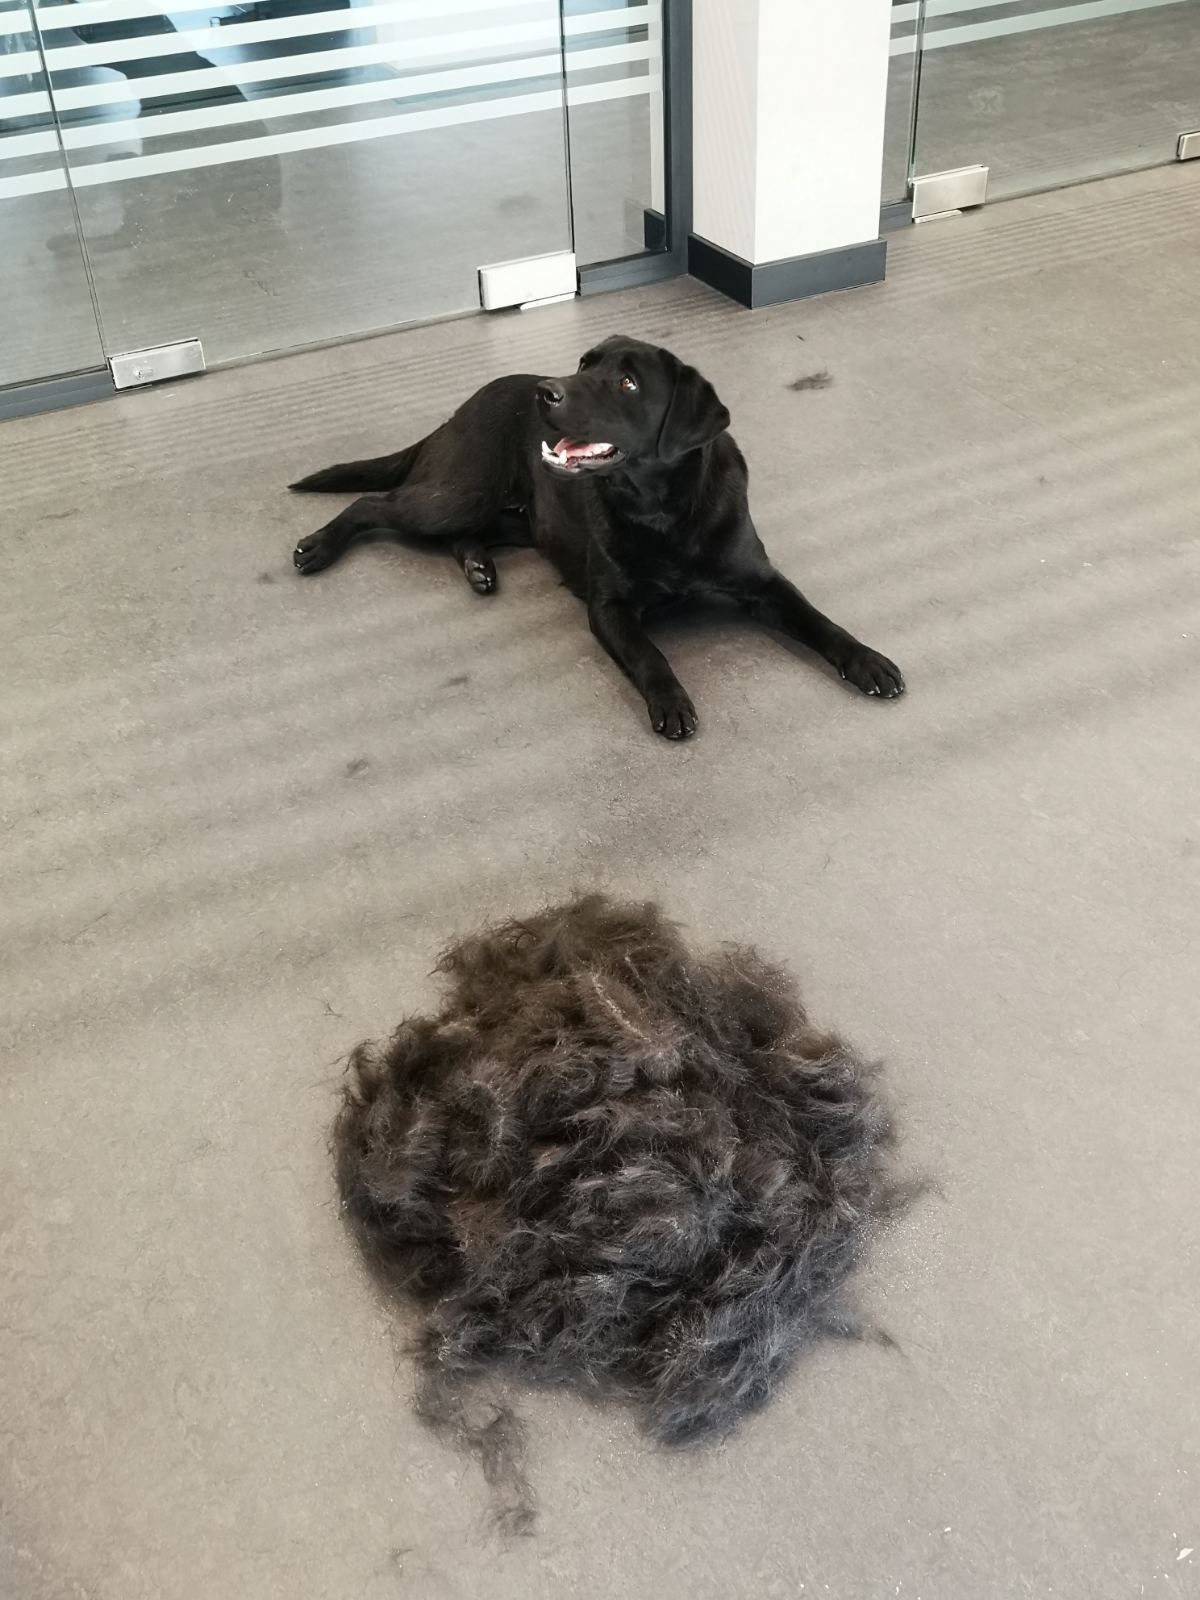 I knew labs shed their winter coat, but WOW